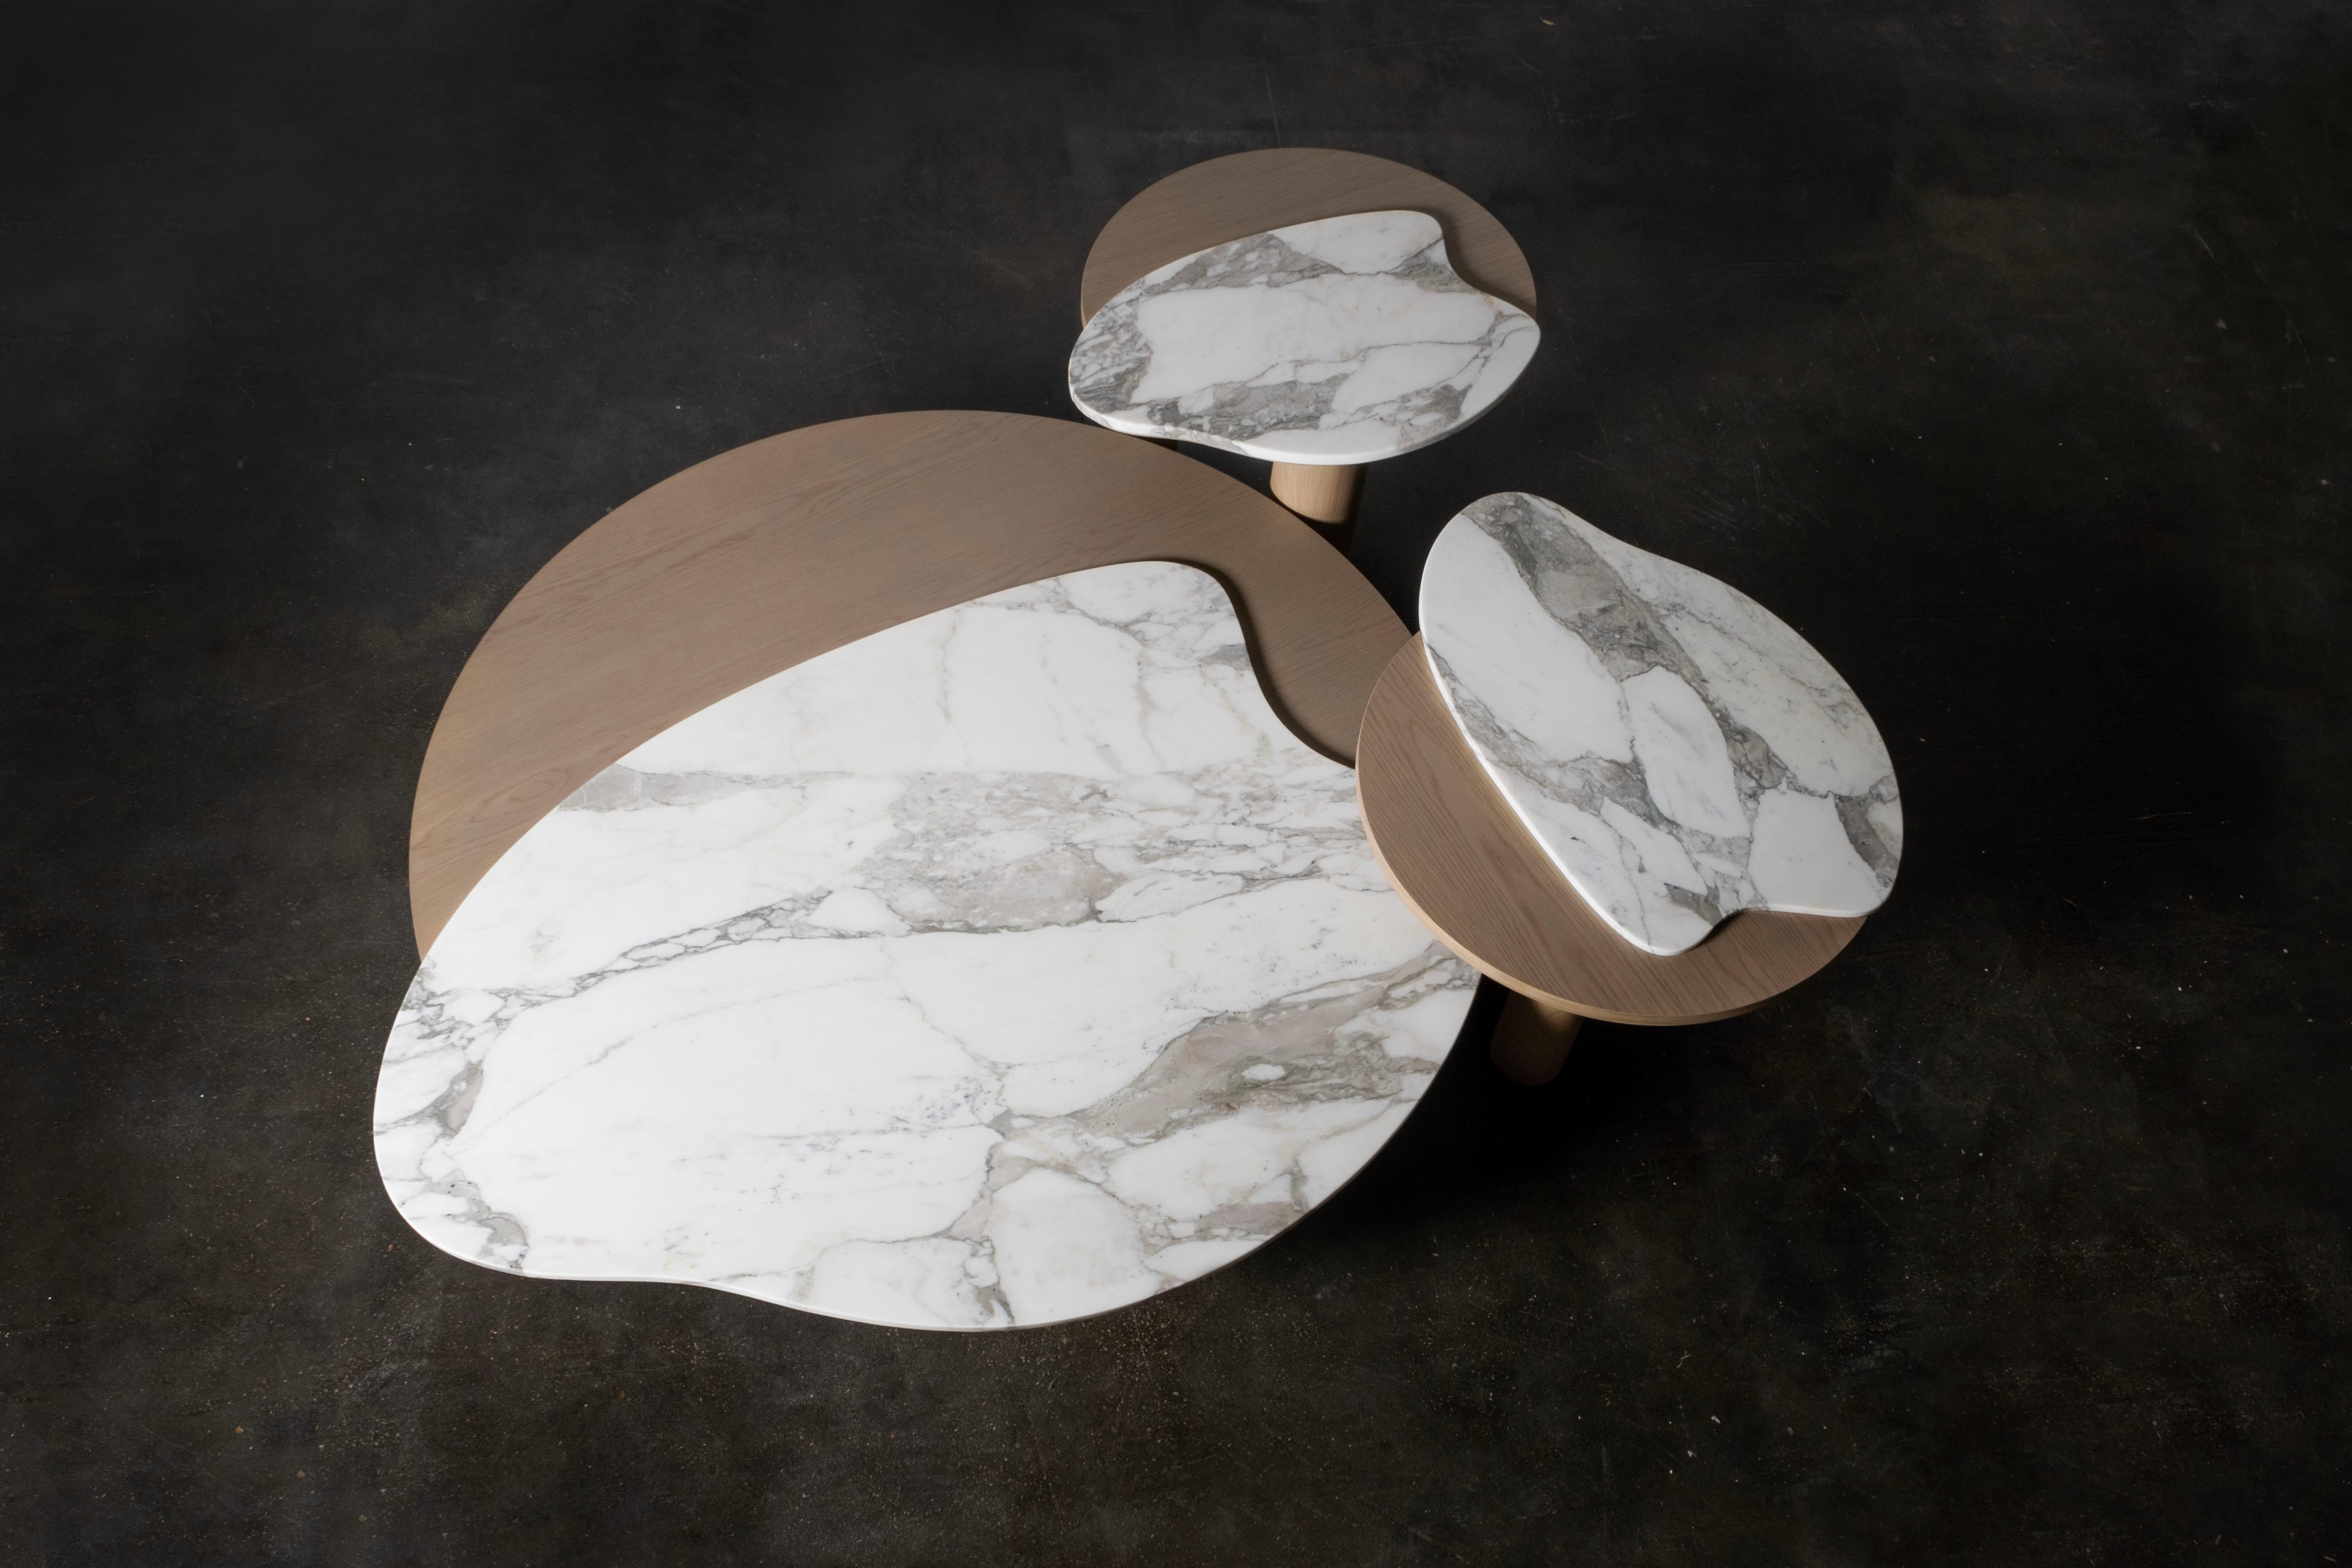 Set/3 Bordeira Nesting Coffee Tables, Contemporary Collection, Handcrafted in Portugal - Europe by Greenapple.

Designed by Rute Martins for the Contemporary Collection, the Bordeira nesting coffee table was designed to add the essence of nature